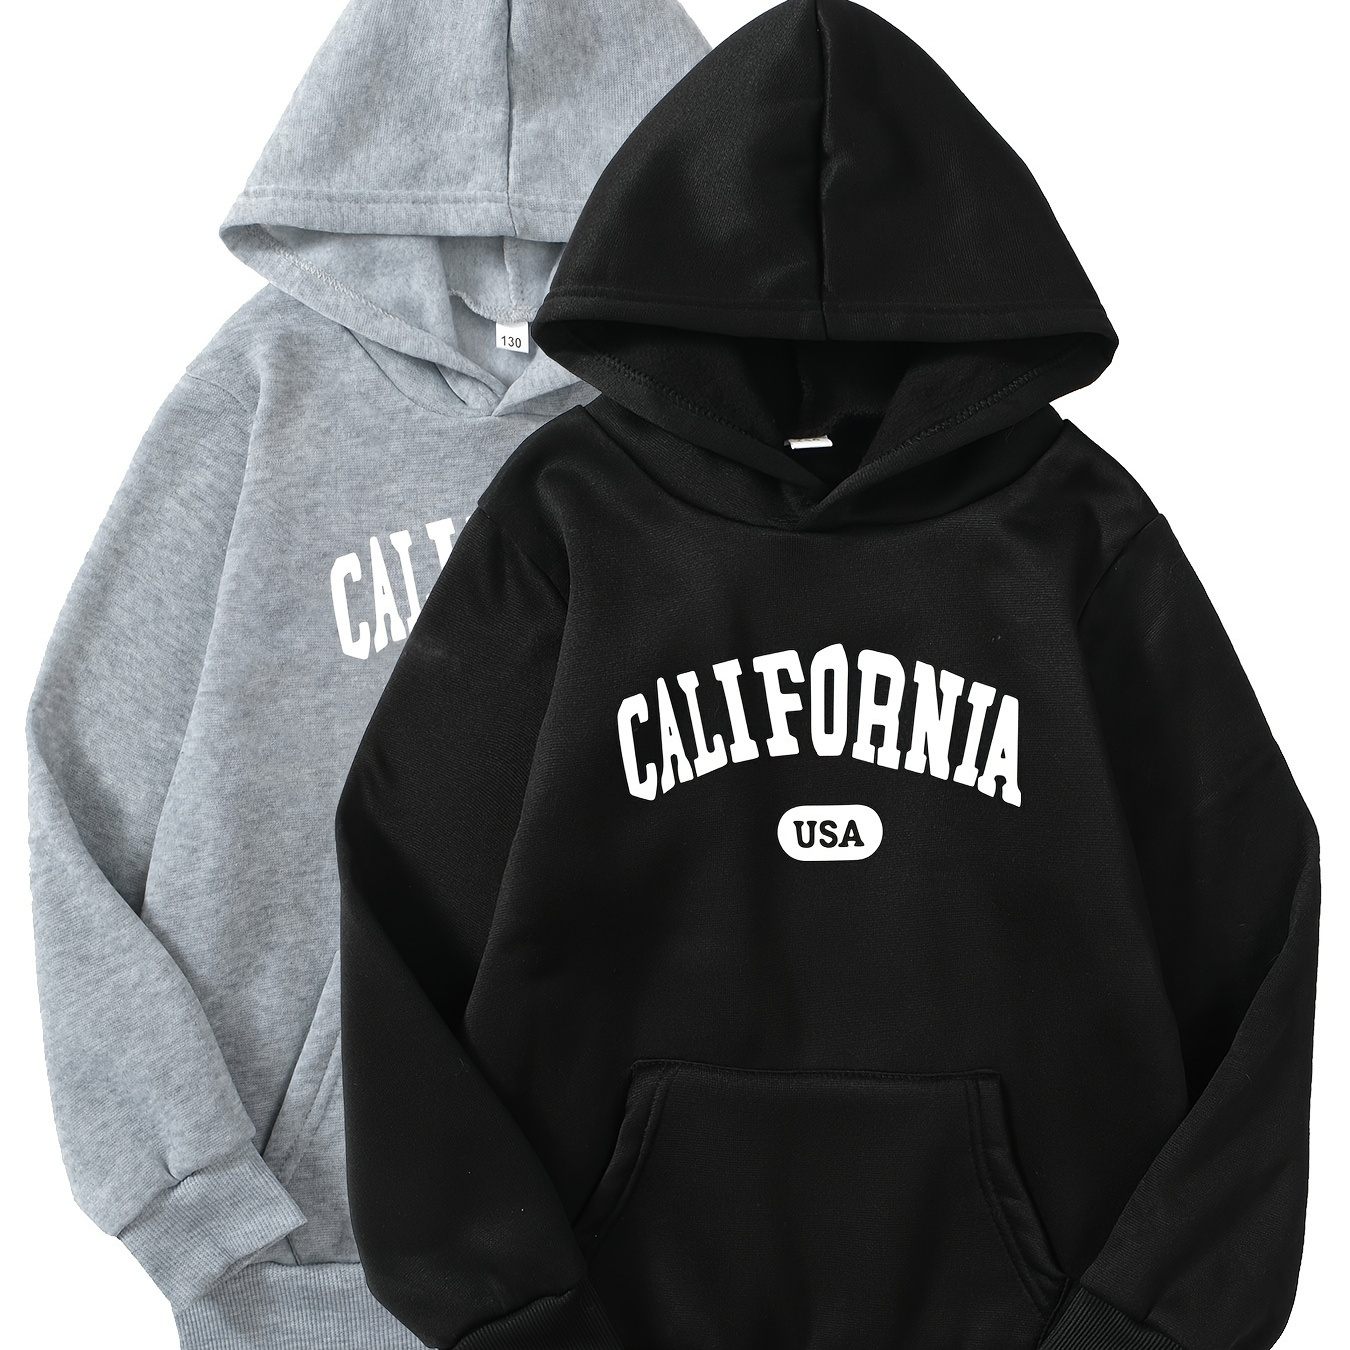 

2pcs California Letter Print Boys Casual Pullover Long Sleeve Hoodies, Boys Sweatshirt For Spring Fall, Kids Hoodie Tops Outdoor